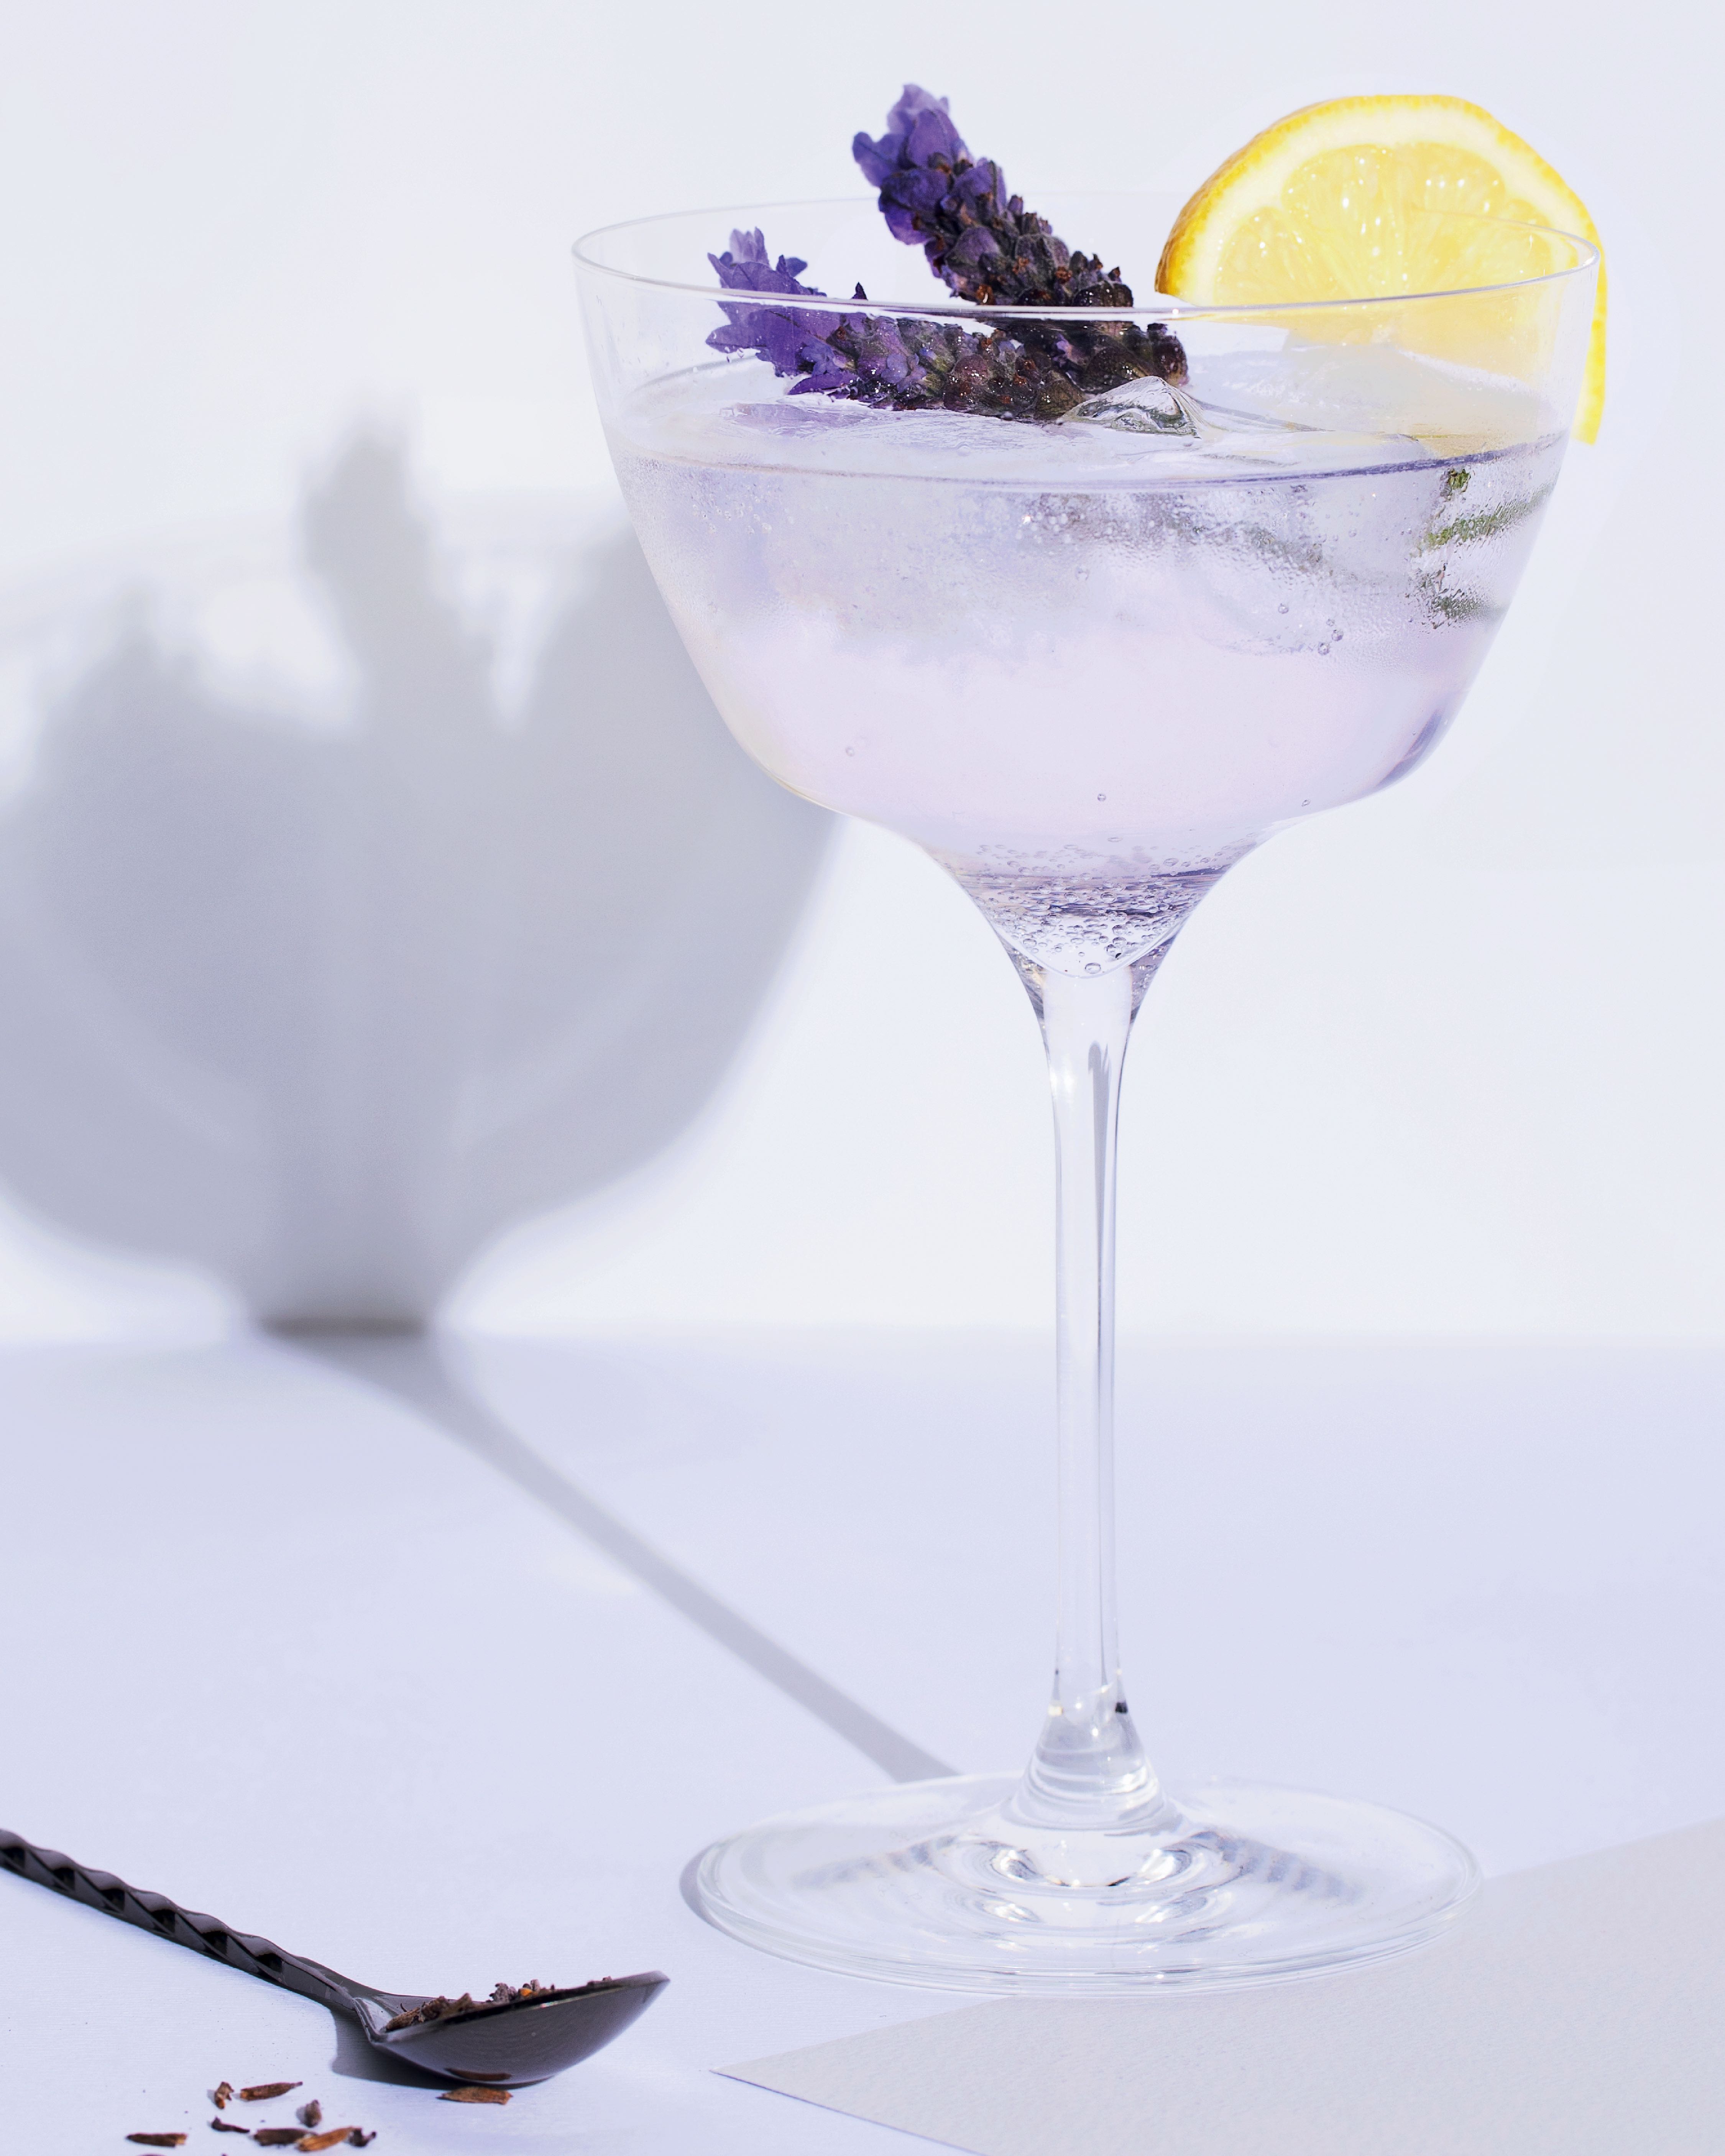 You are currently viewing Growing lavender in your garden? Make this lavender G&T